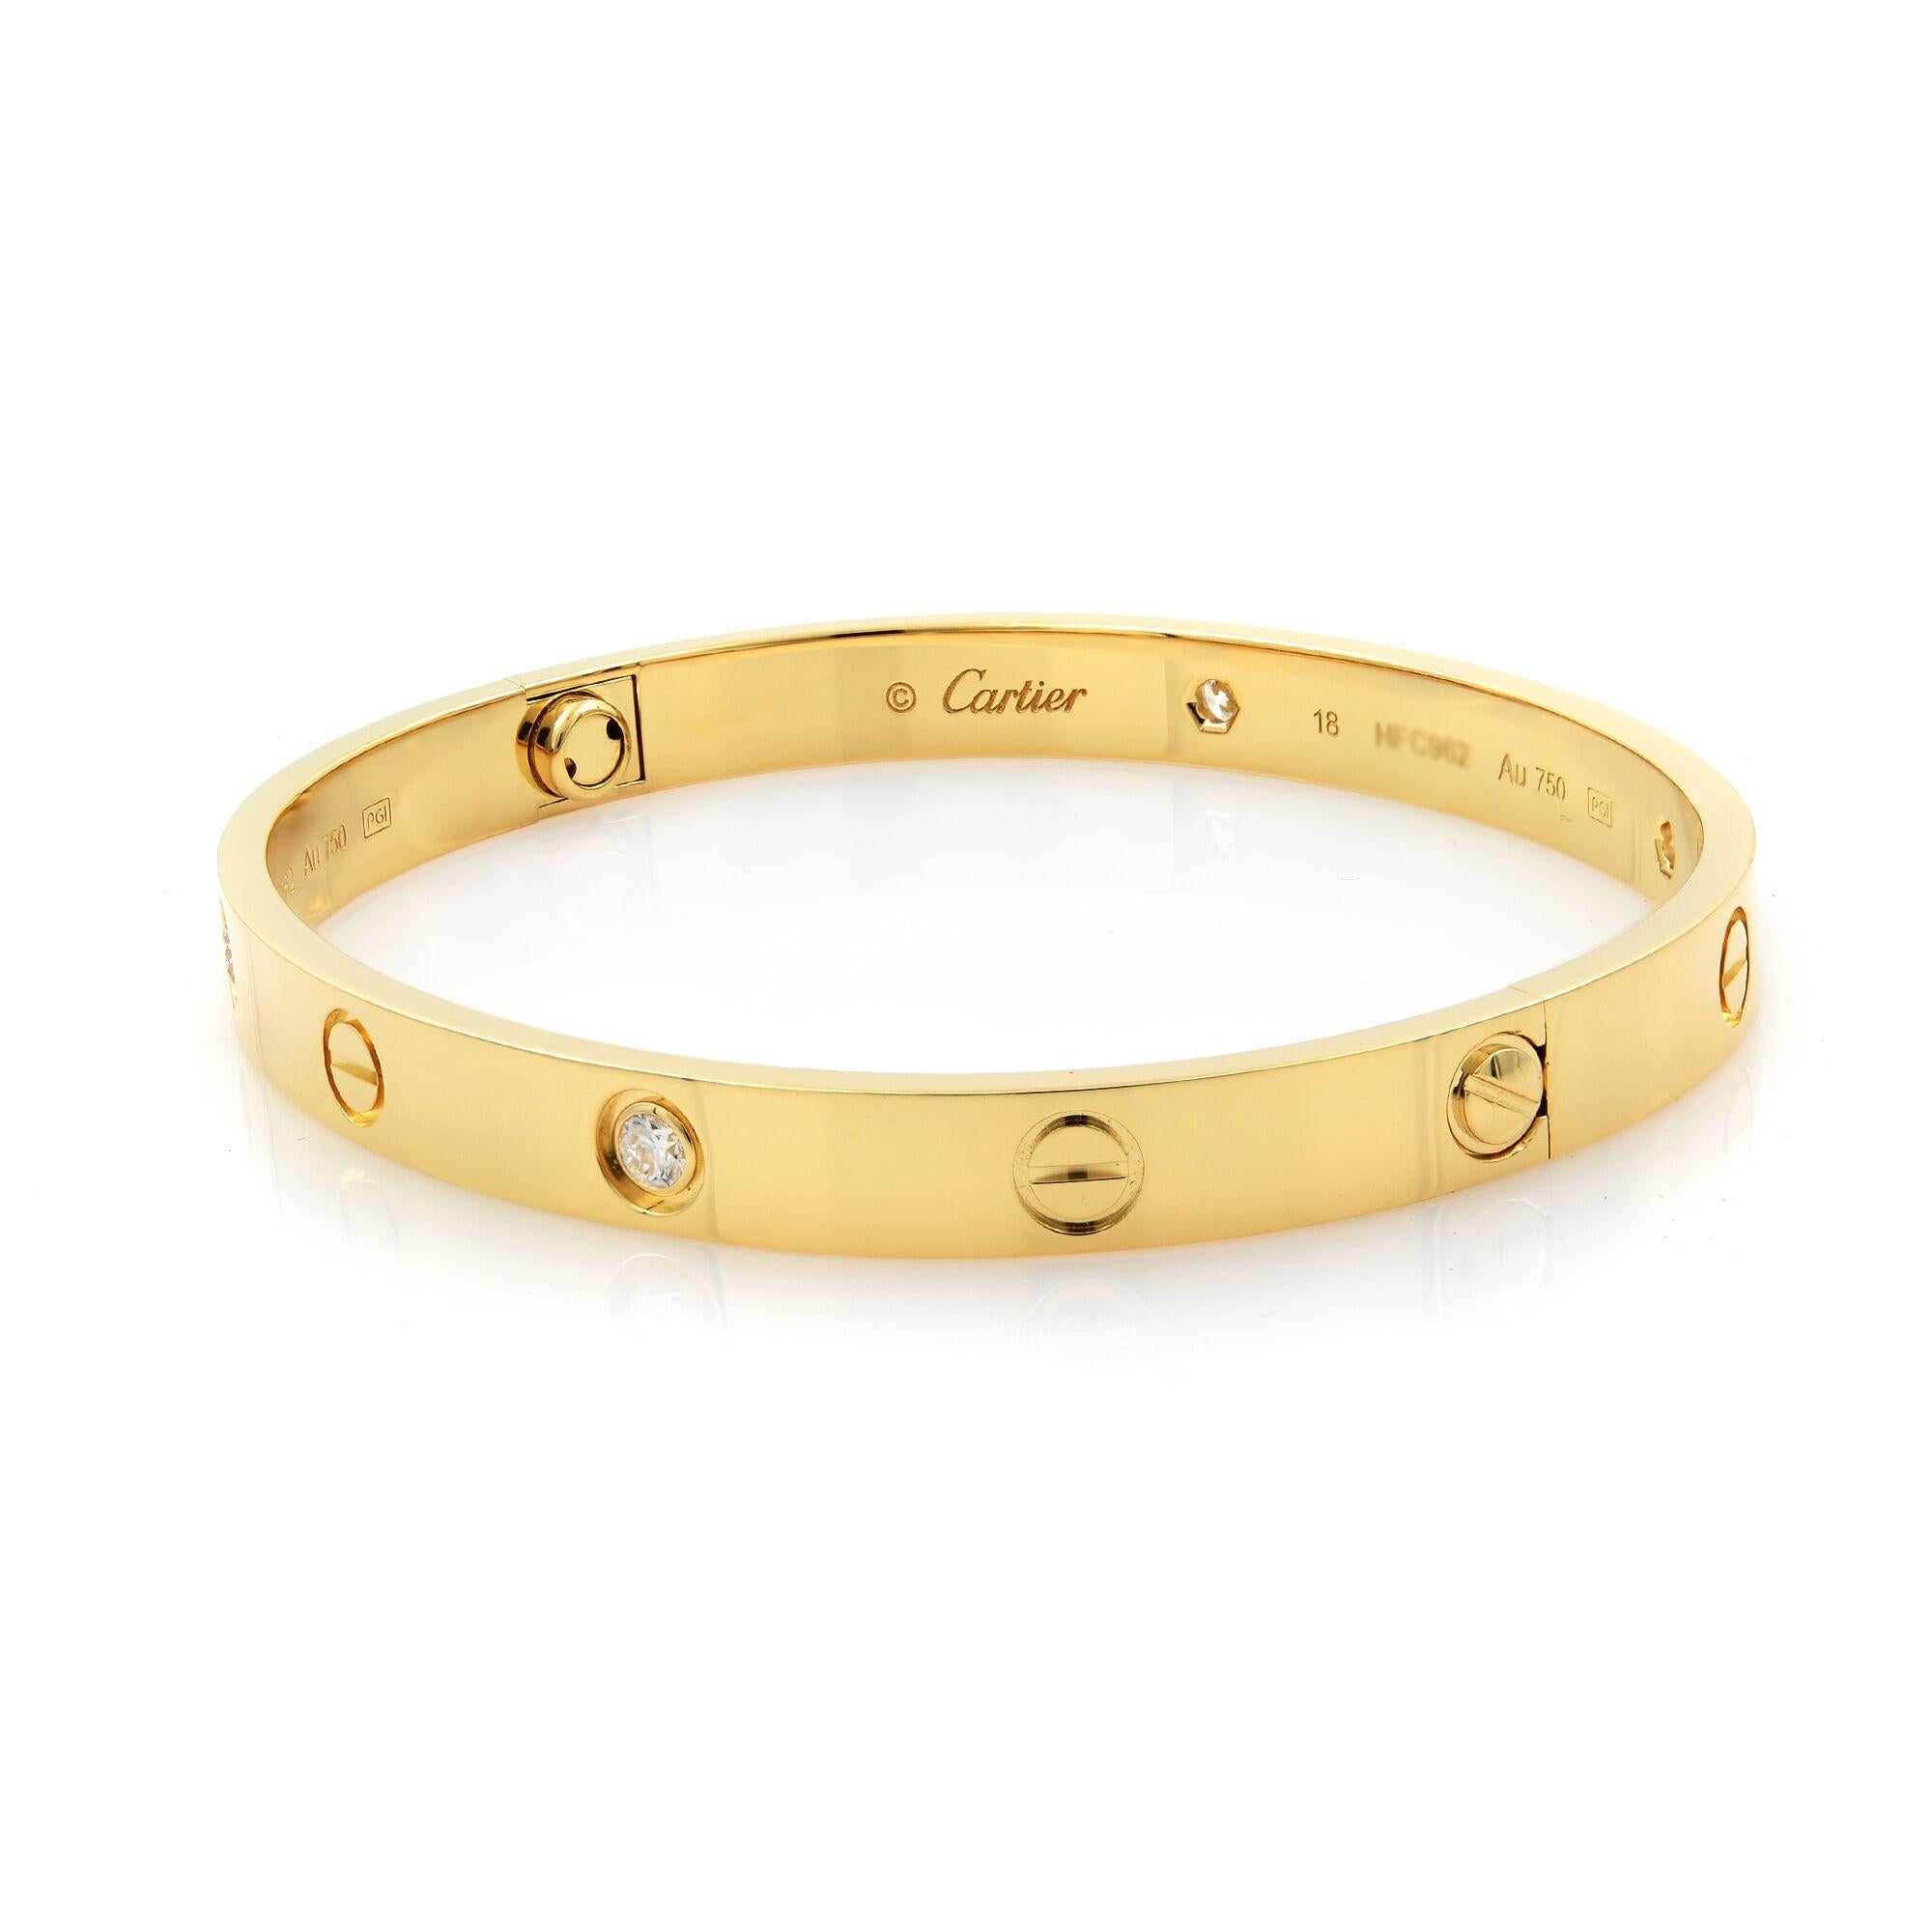 Four diamond Love Bracelet from Cartier
Condition: Unworn
18K Yellow Gold
Diamond weight: 0.42 carat
Comes With: Original box, papers and a screwdriver
New Style
Size 18